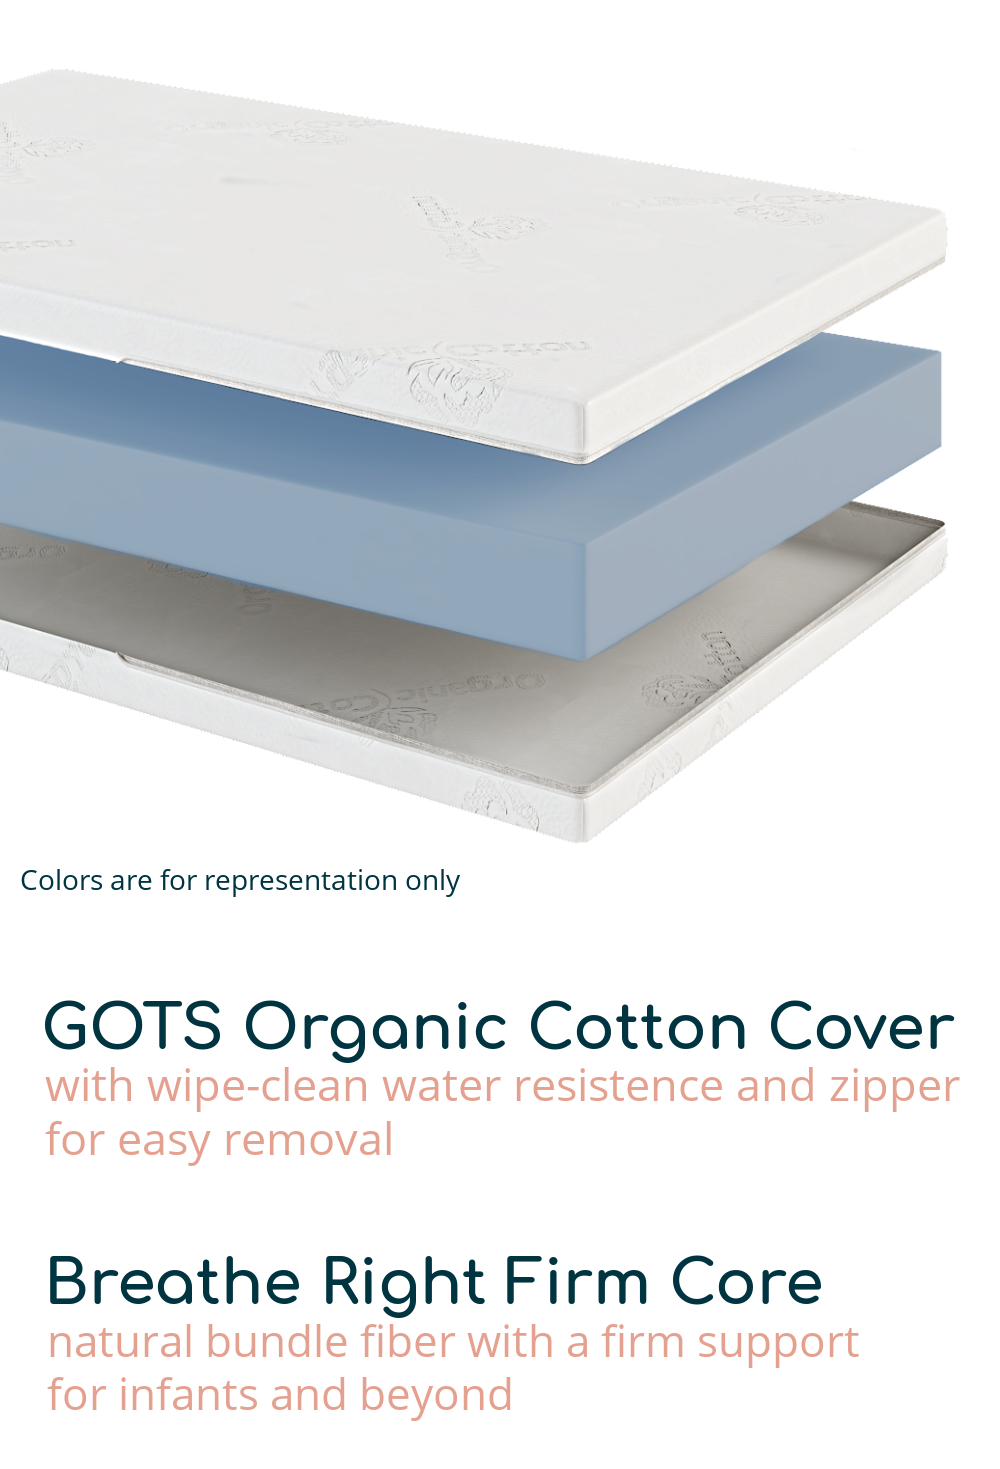 Includes GOTS Organic Cotton Cover-with wipe clean resistance, and Breathe Right Firm Core-natural bundle fiber with a firm support